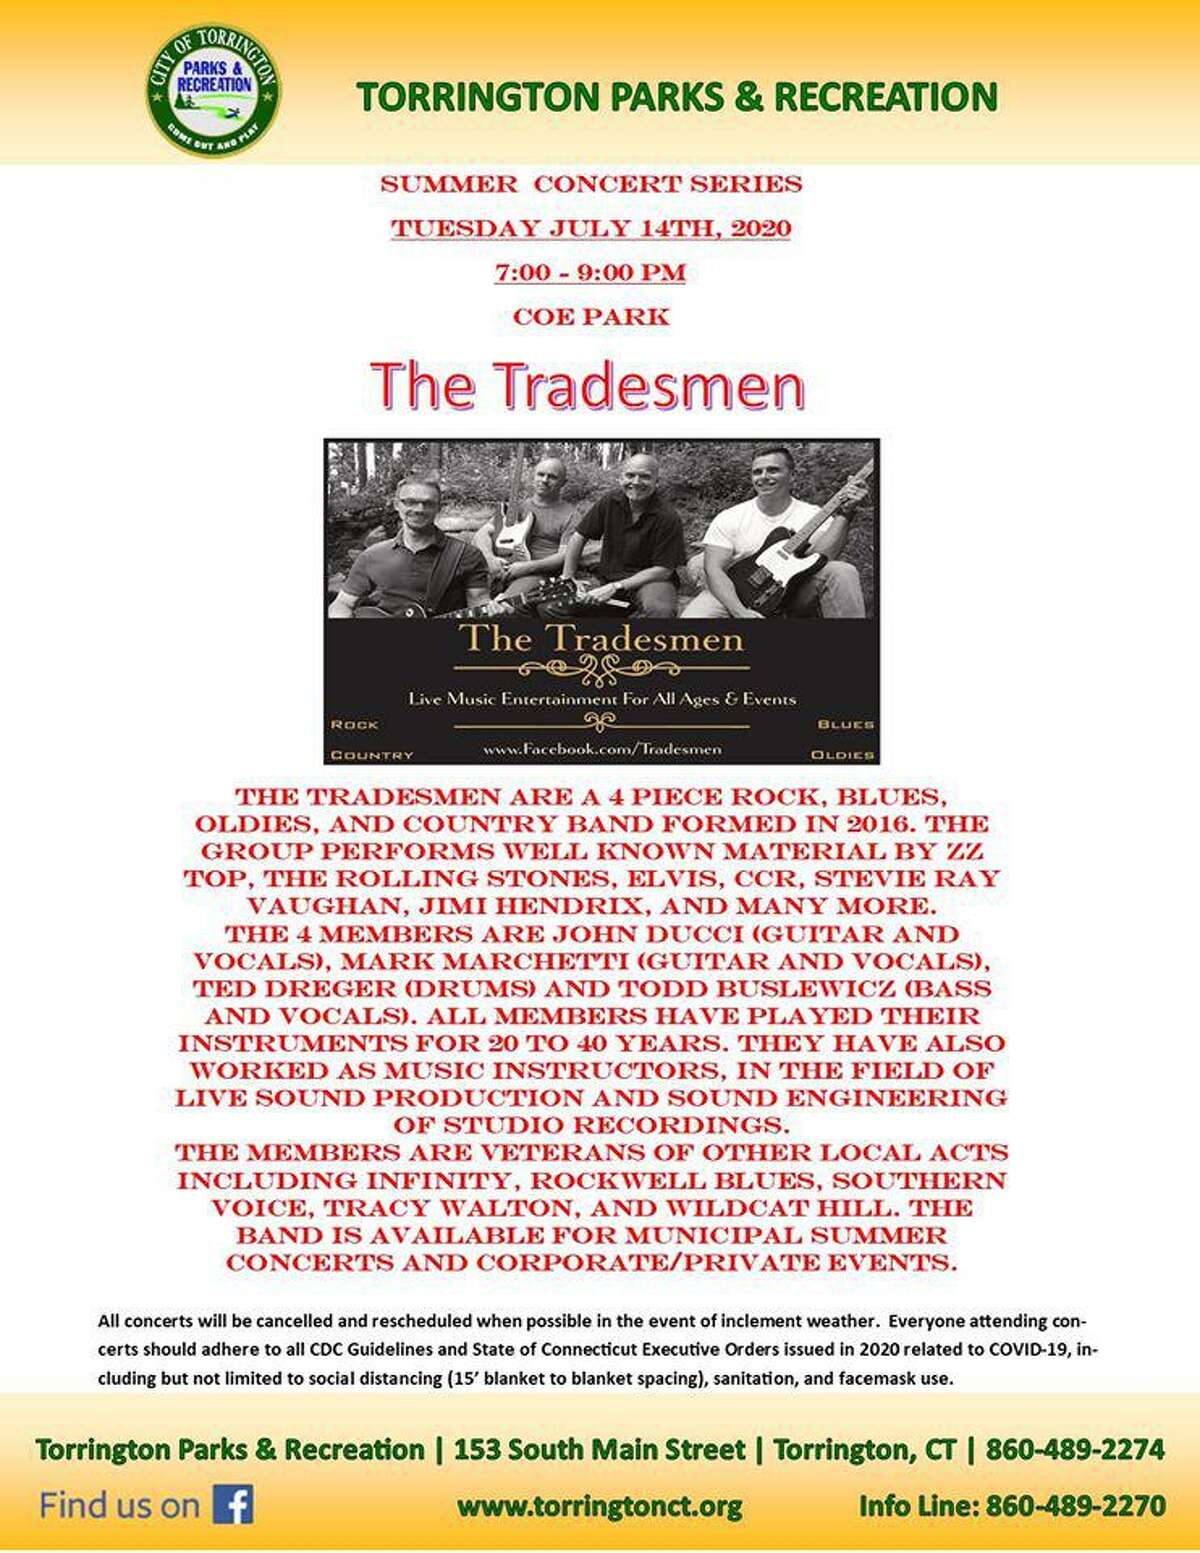 The Tradesmen are scheduled to perform Tuesday night at Coe Memorial Park Civic Center. The concert is part of the Parks and Recreation Department's annual summer concerts series.